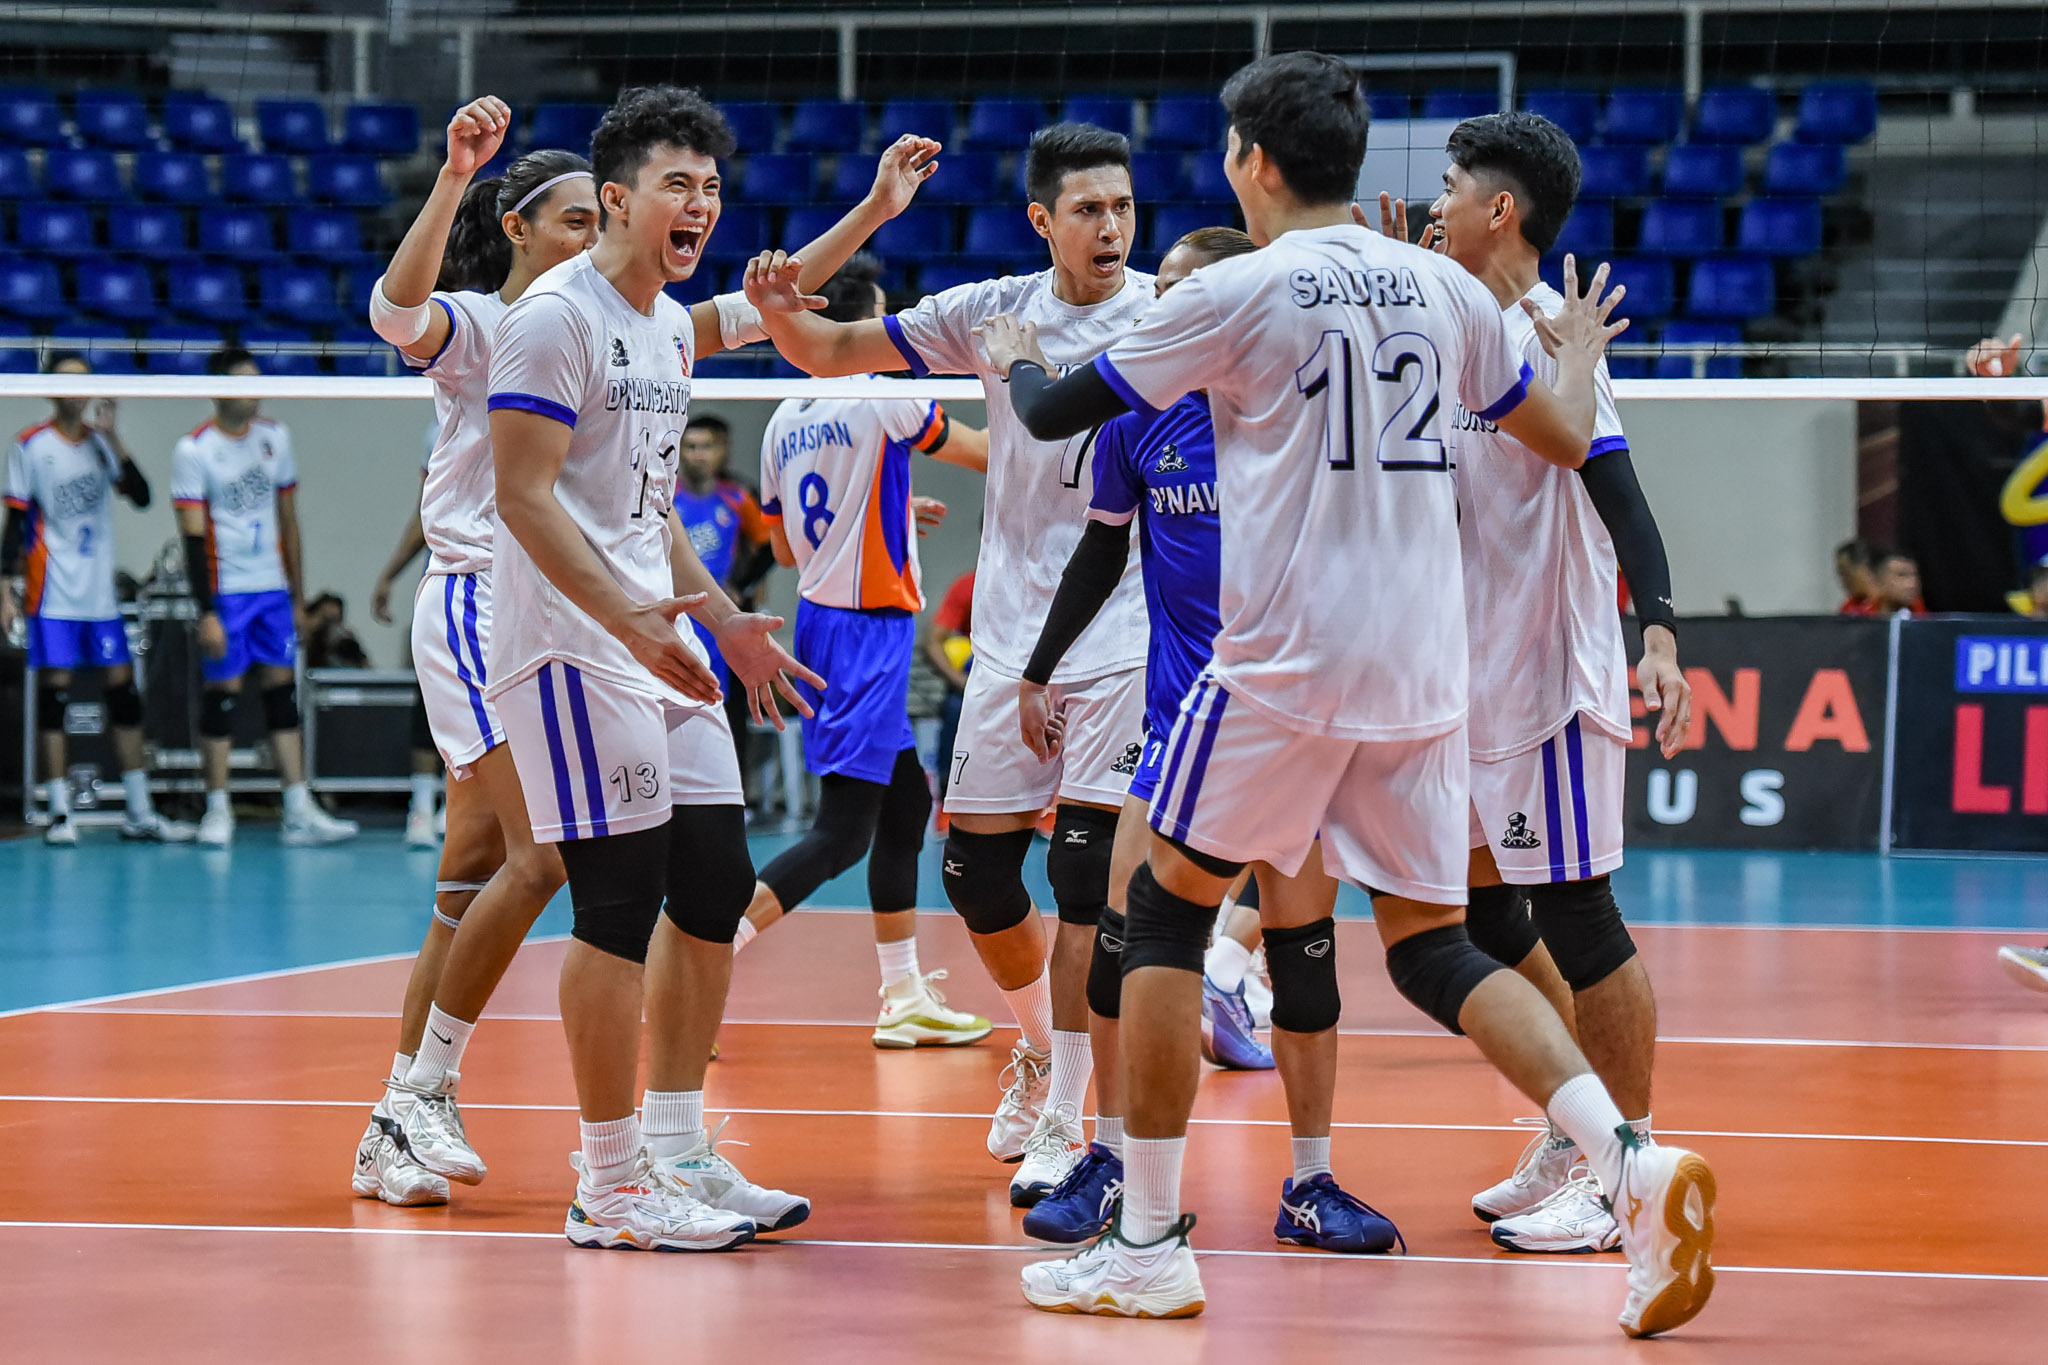 D'Navigators in the Spikers' Turf Open Conference